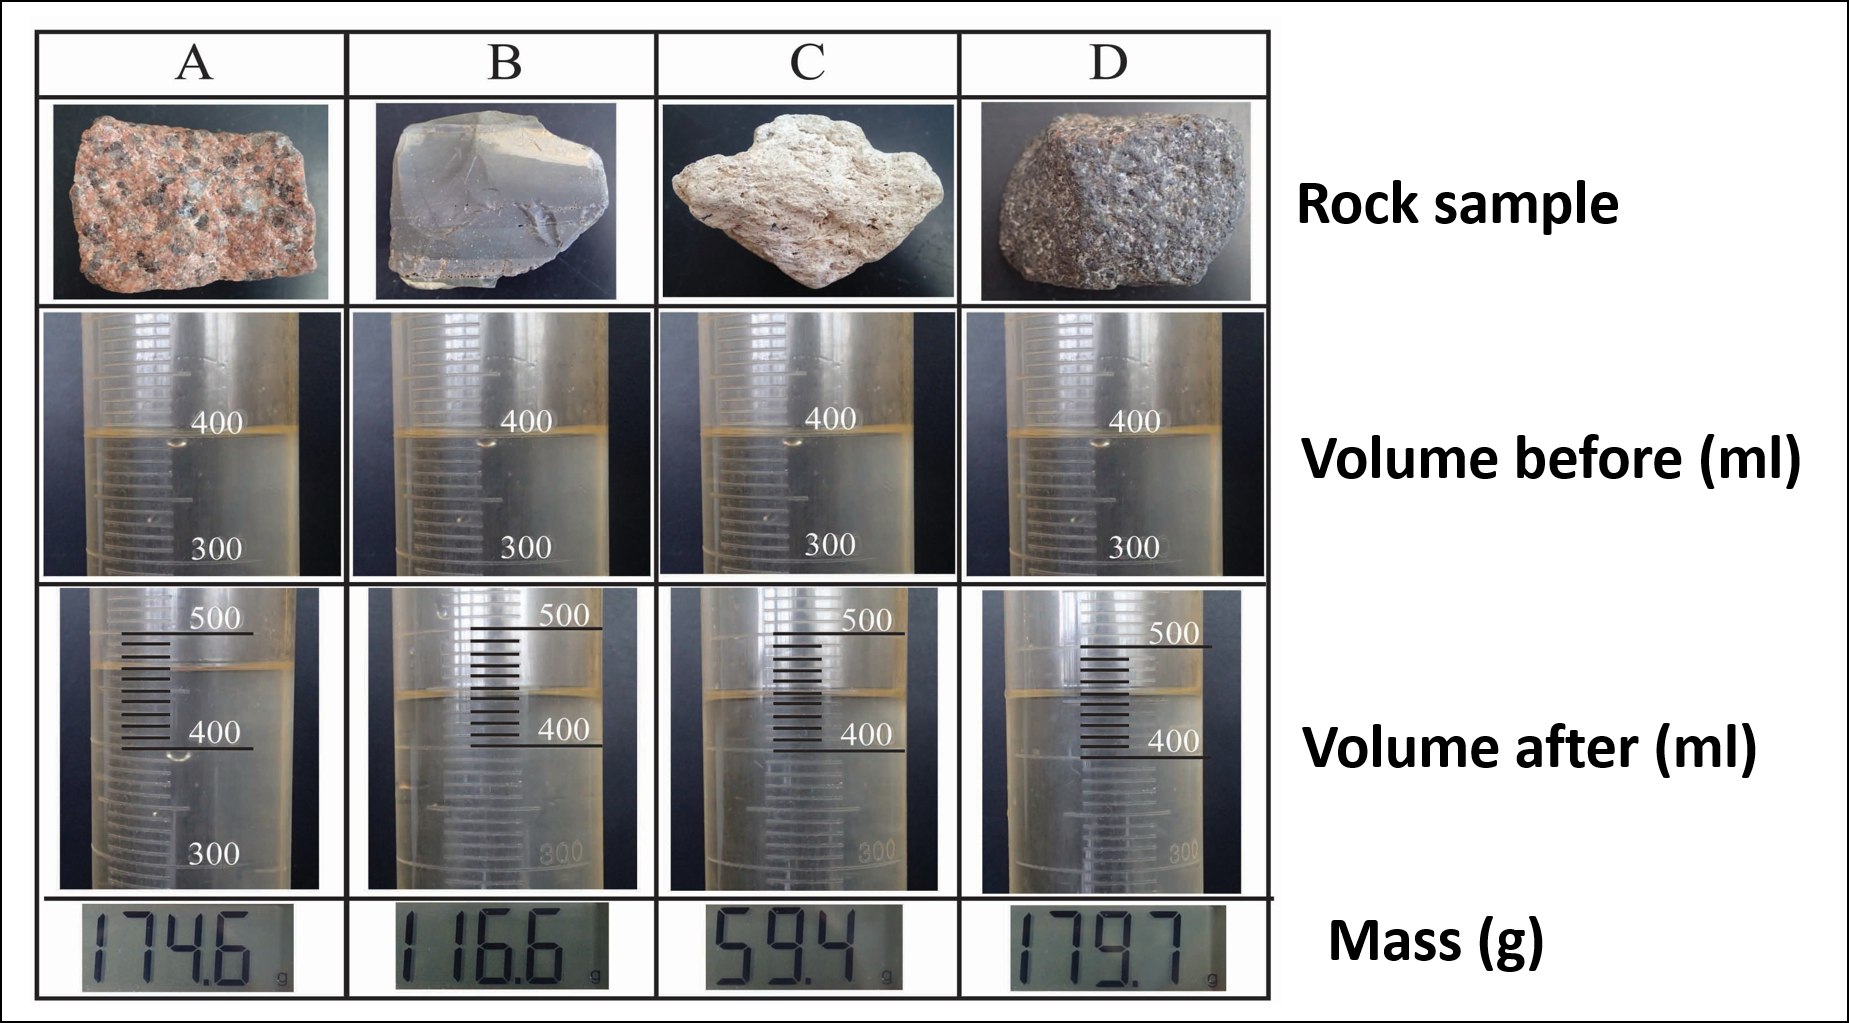 First row, rock samples. Second row, volume (ml) before. Third row, volume (ml) after. Fourth row, mass (g).​​